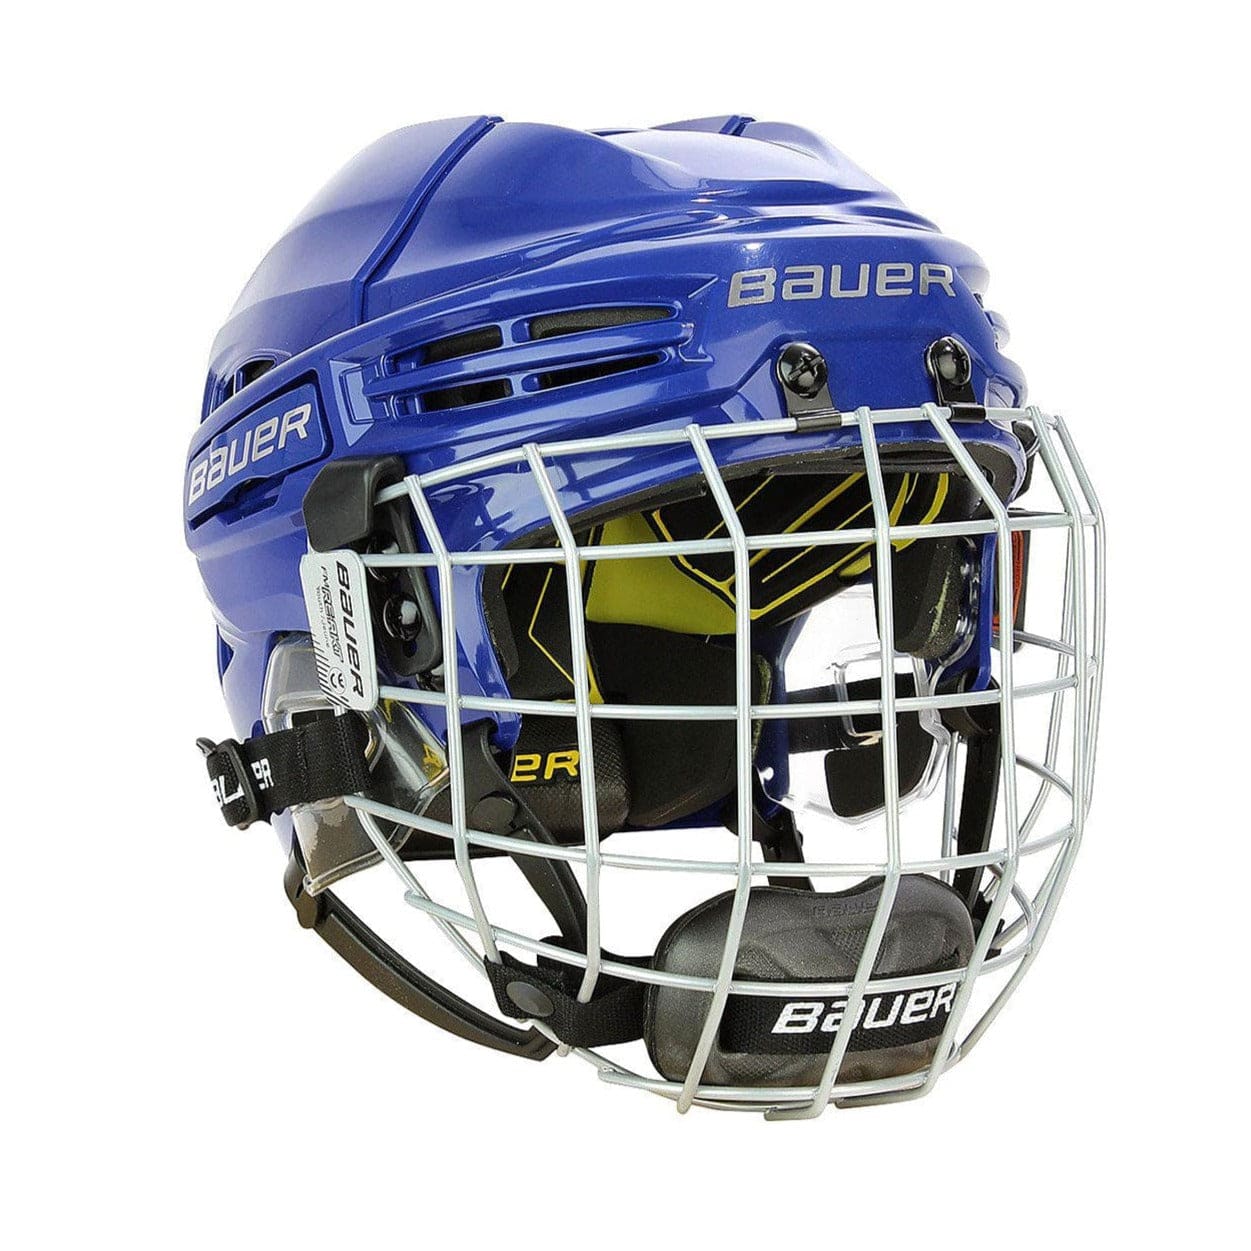 Bauer RE-AKT 100 Youth Hockey Helmet / Cage Combo - The Hockey Shop Source For Sports